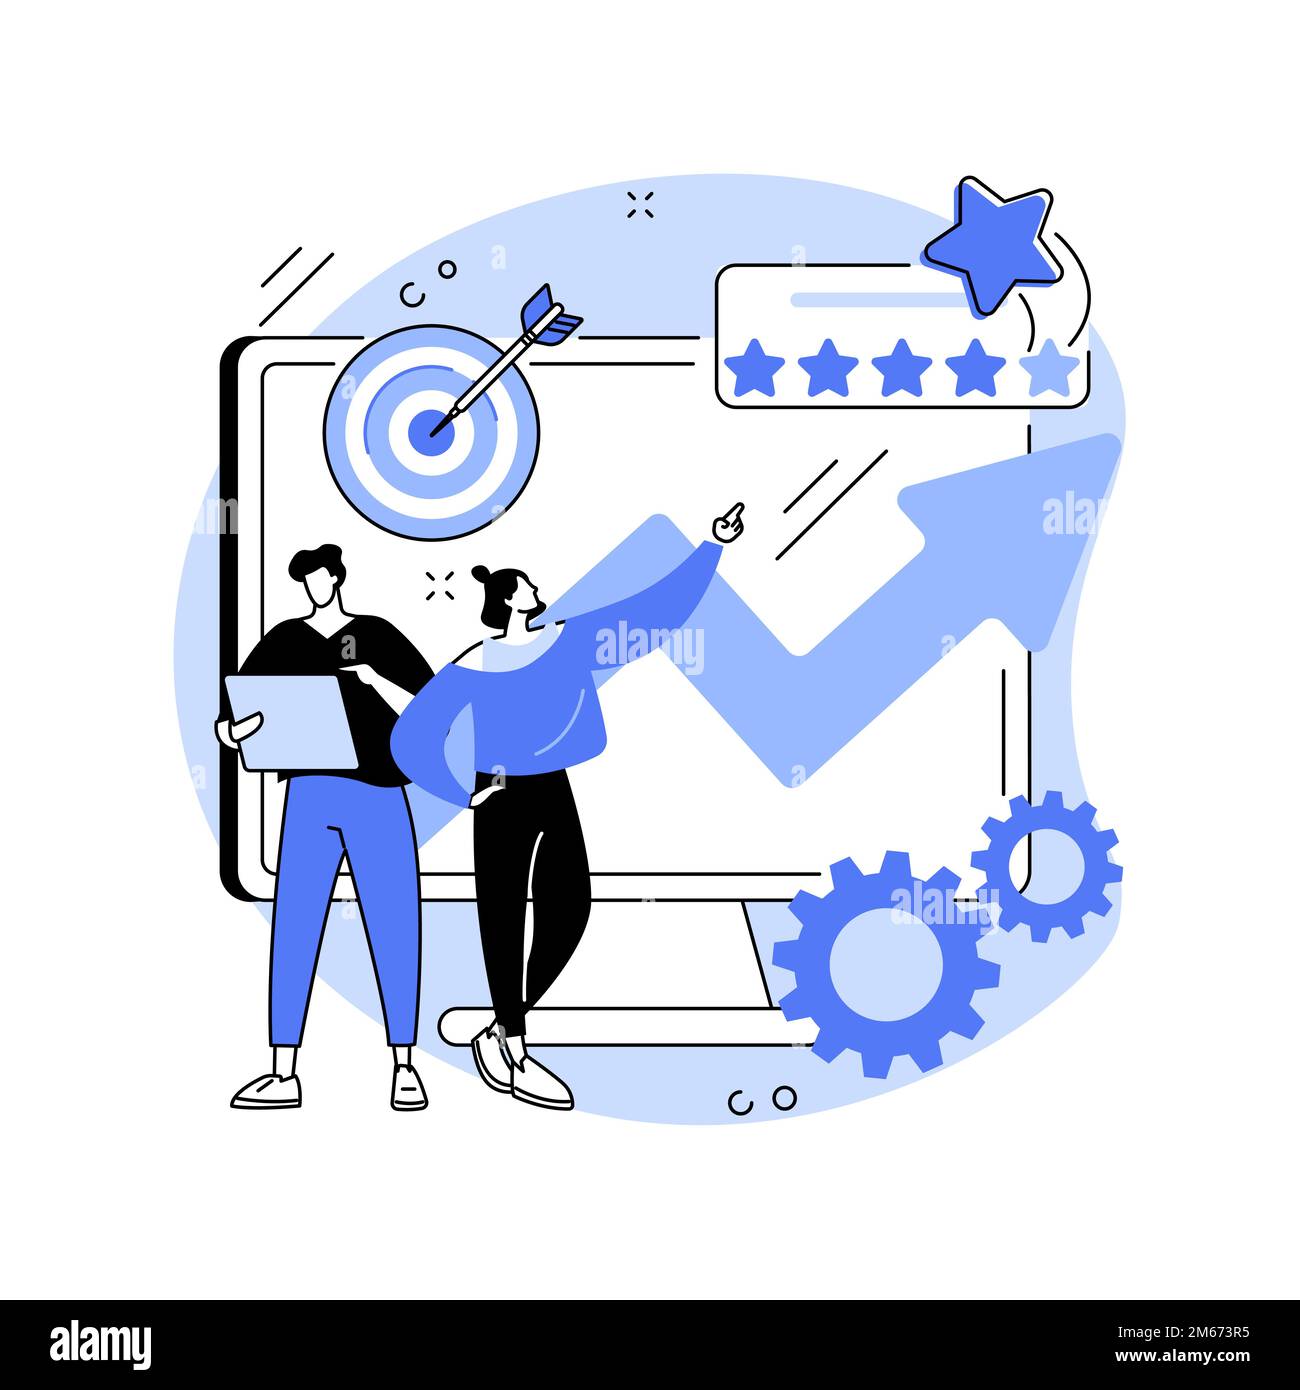 Reputation management abstract concept vector illustration. Digital marketing service, webpage navigation, public relations, communication strategy, s Stock Vector